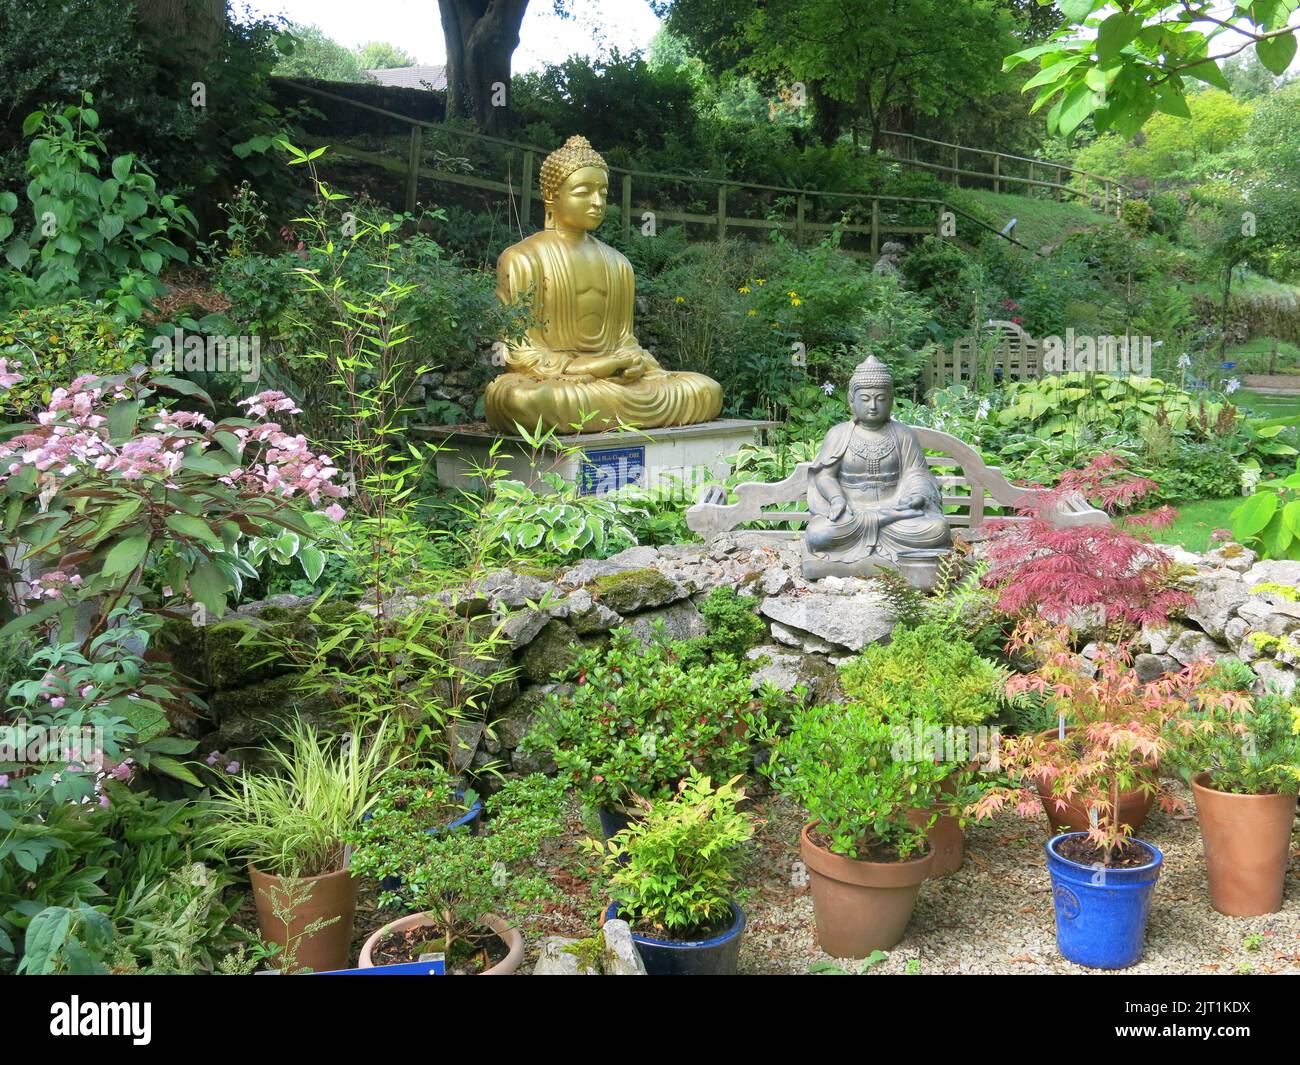 With acers and Buddhist statues, Cascades Garden in Derbyshire draws its inspiration from traditional Japanese gardens and the philosophy of Buddhism. Stock Photo